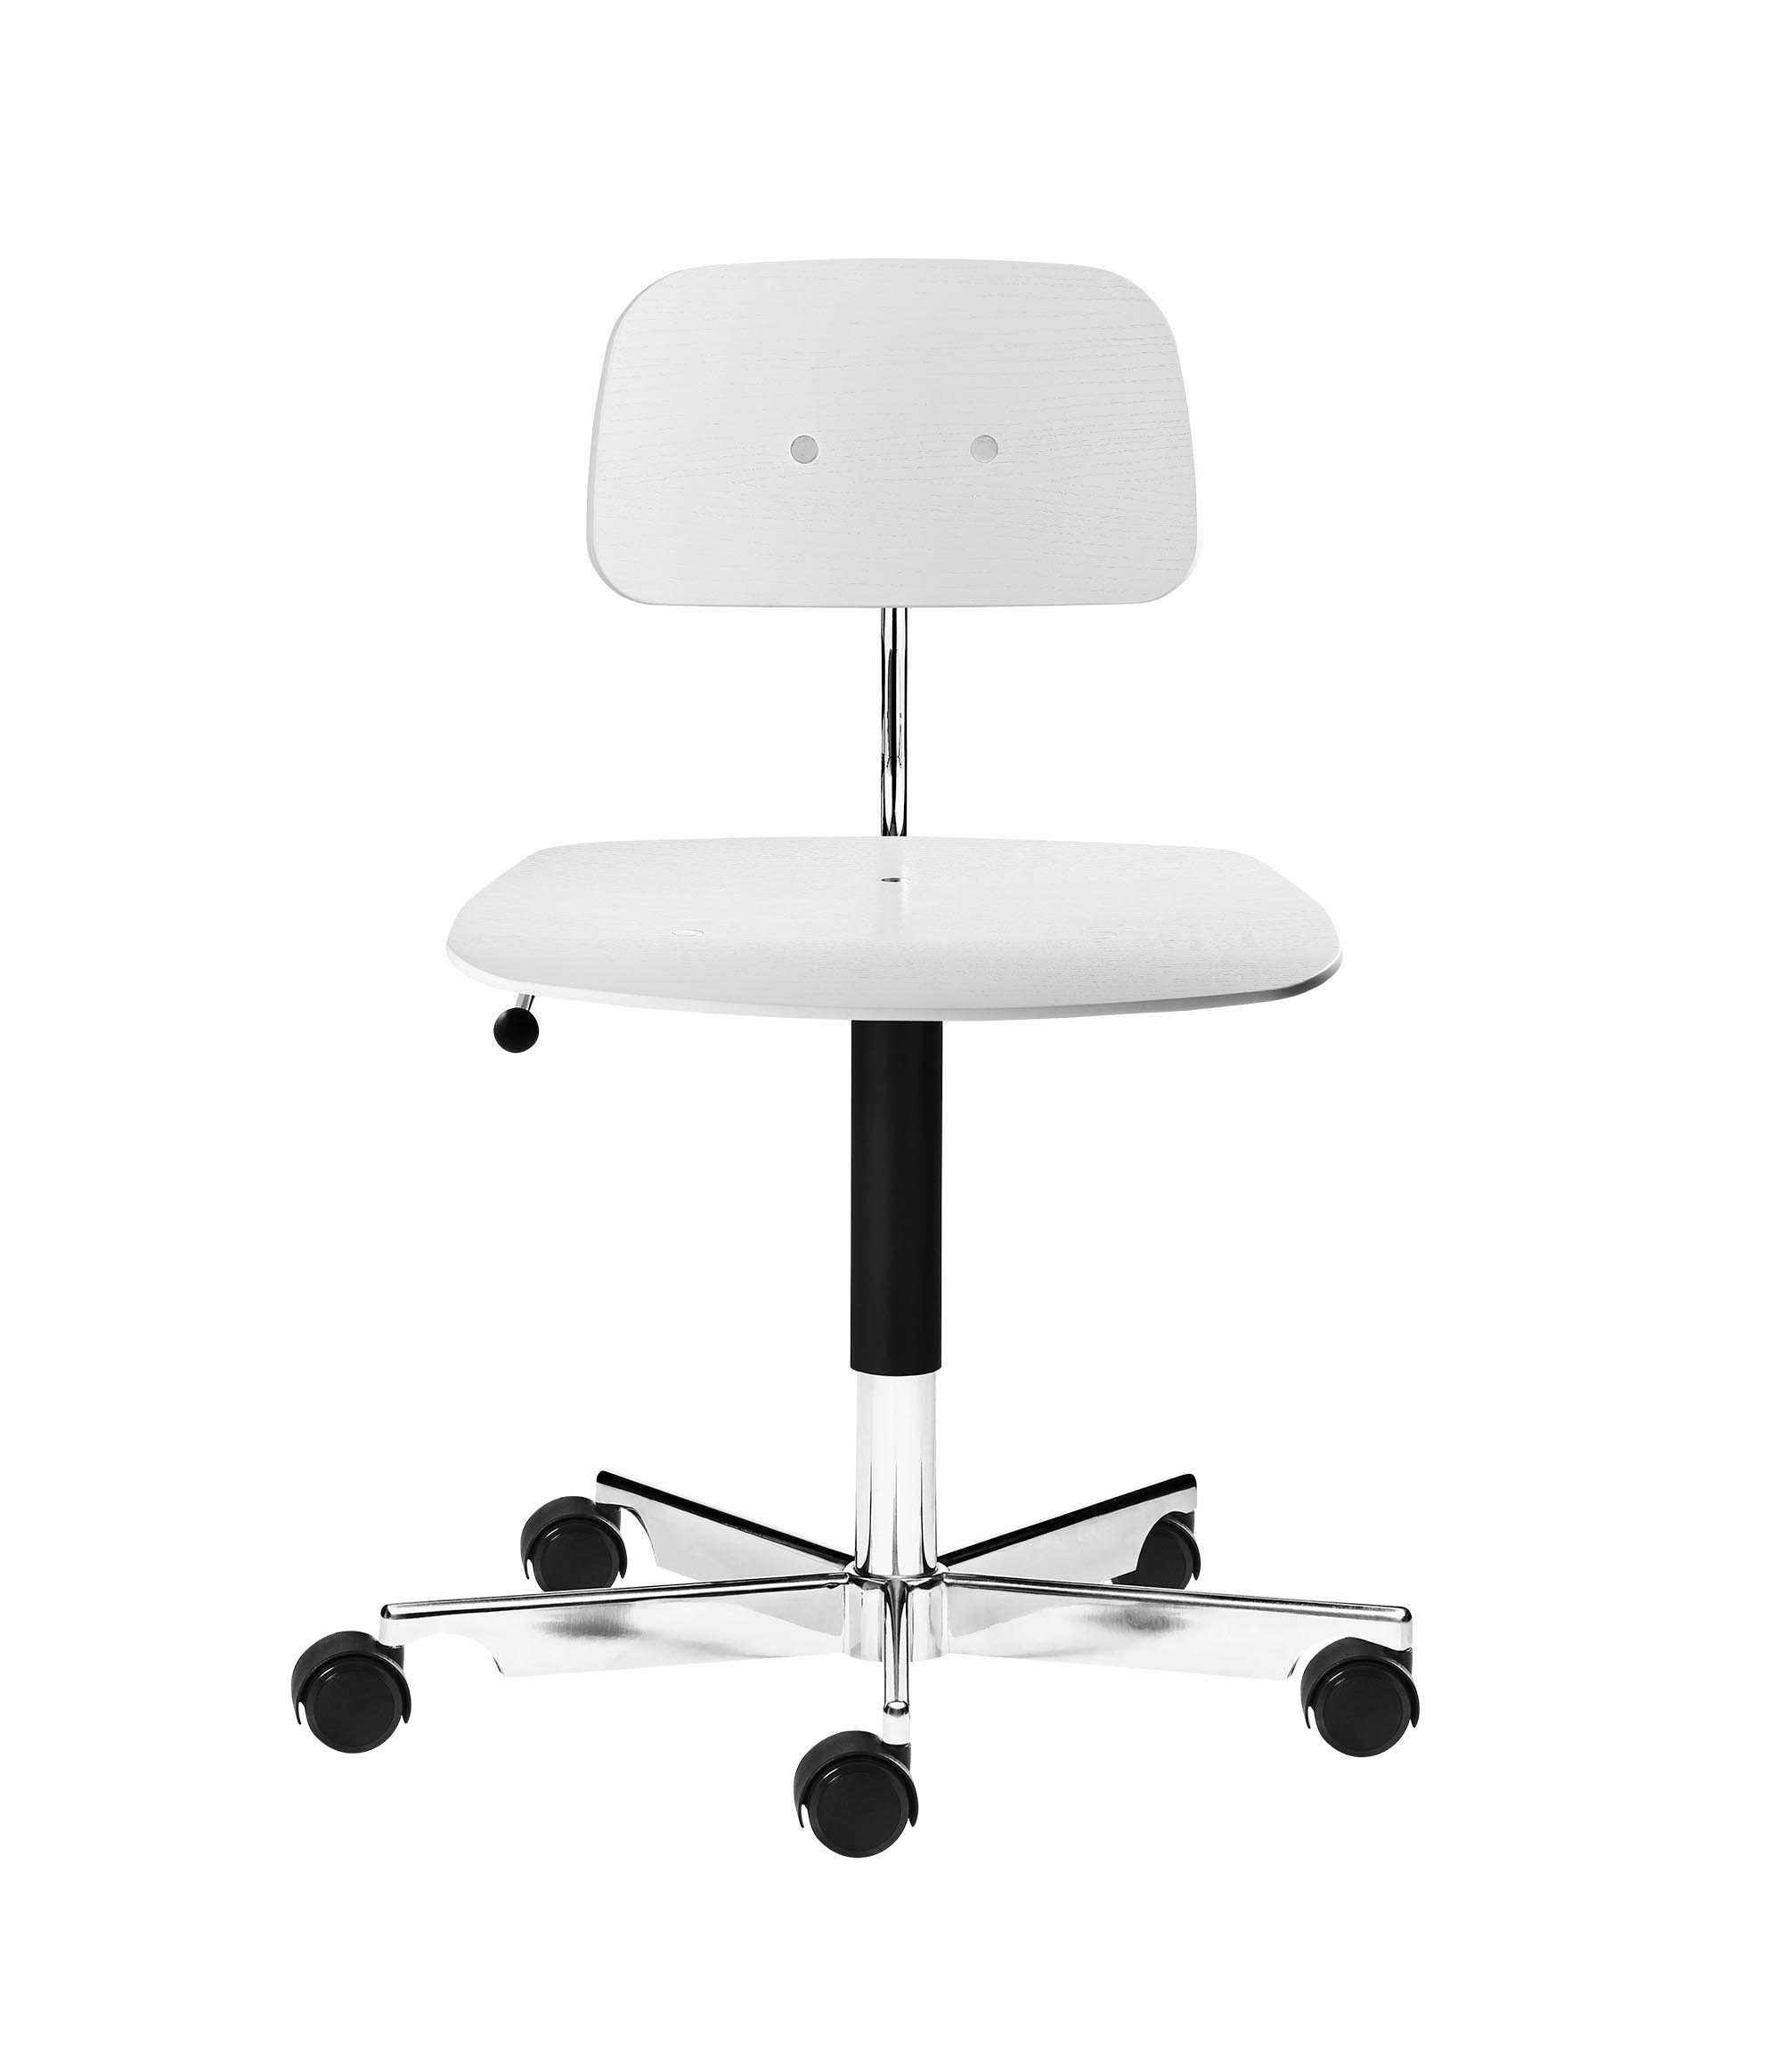 Kevi Chairs And Tables For Home Or Office Image Bank Engelbrechts